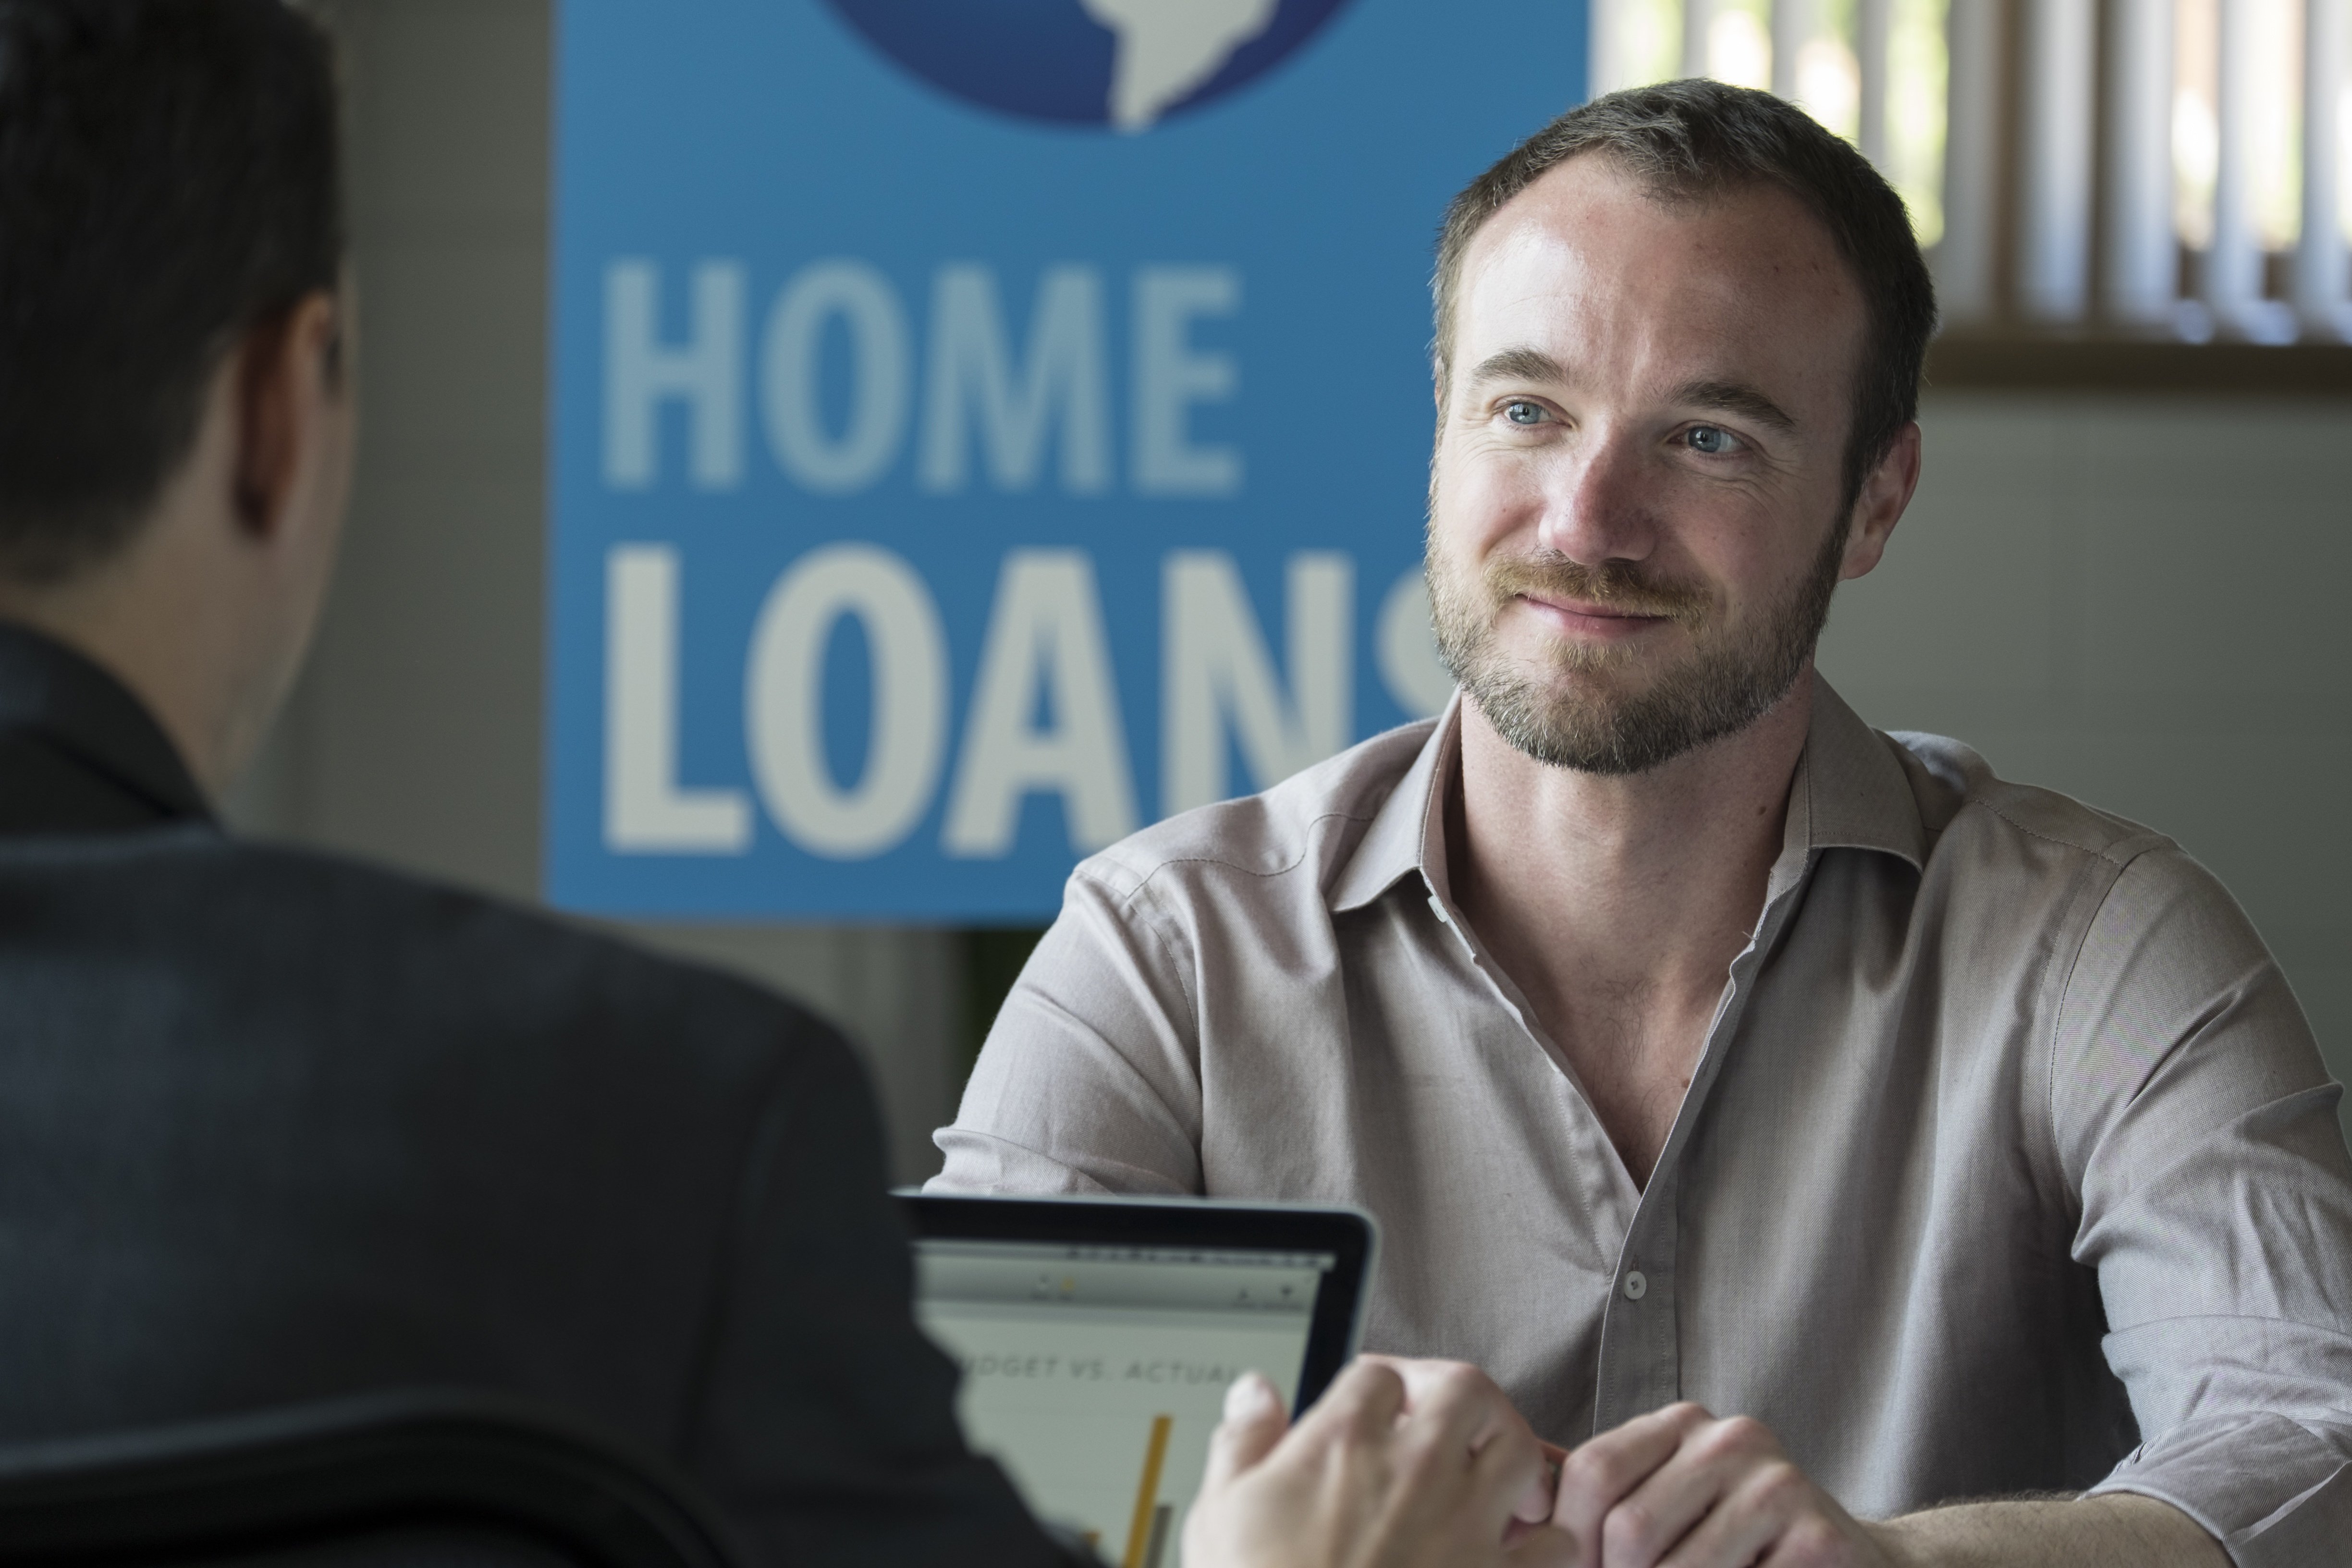 What Do I Need To Qualify For A Home Loan?